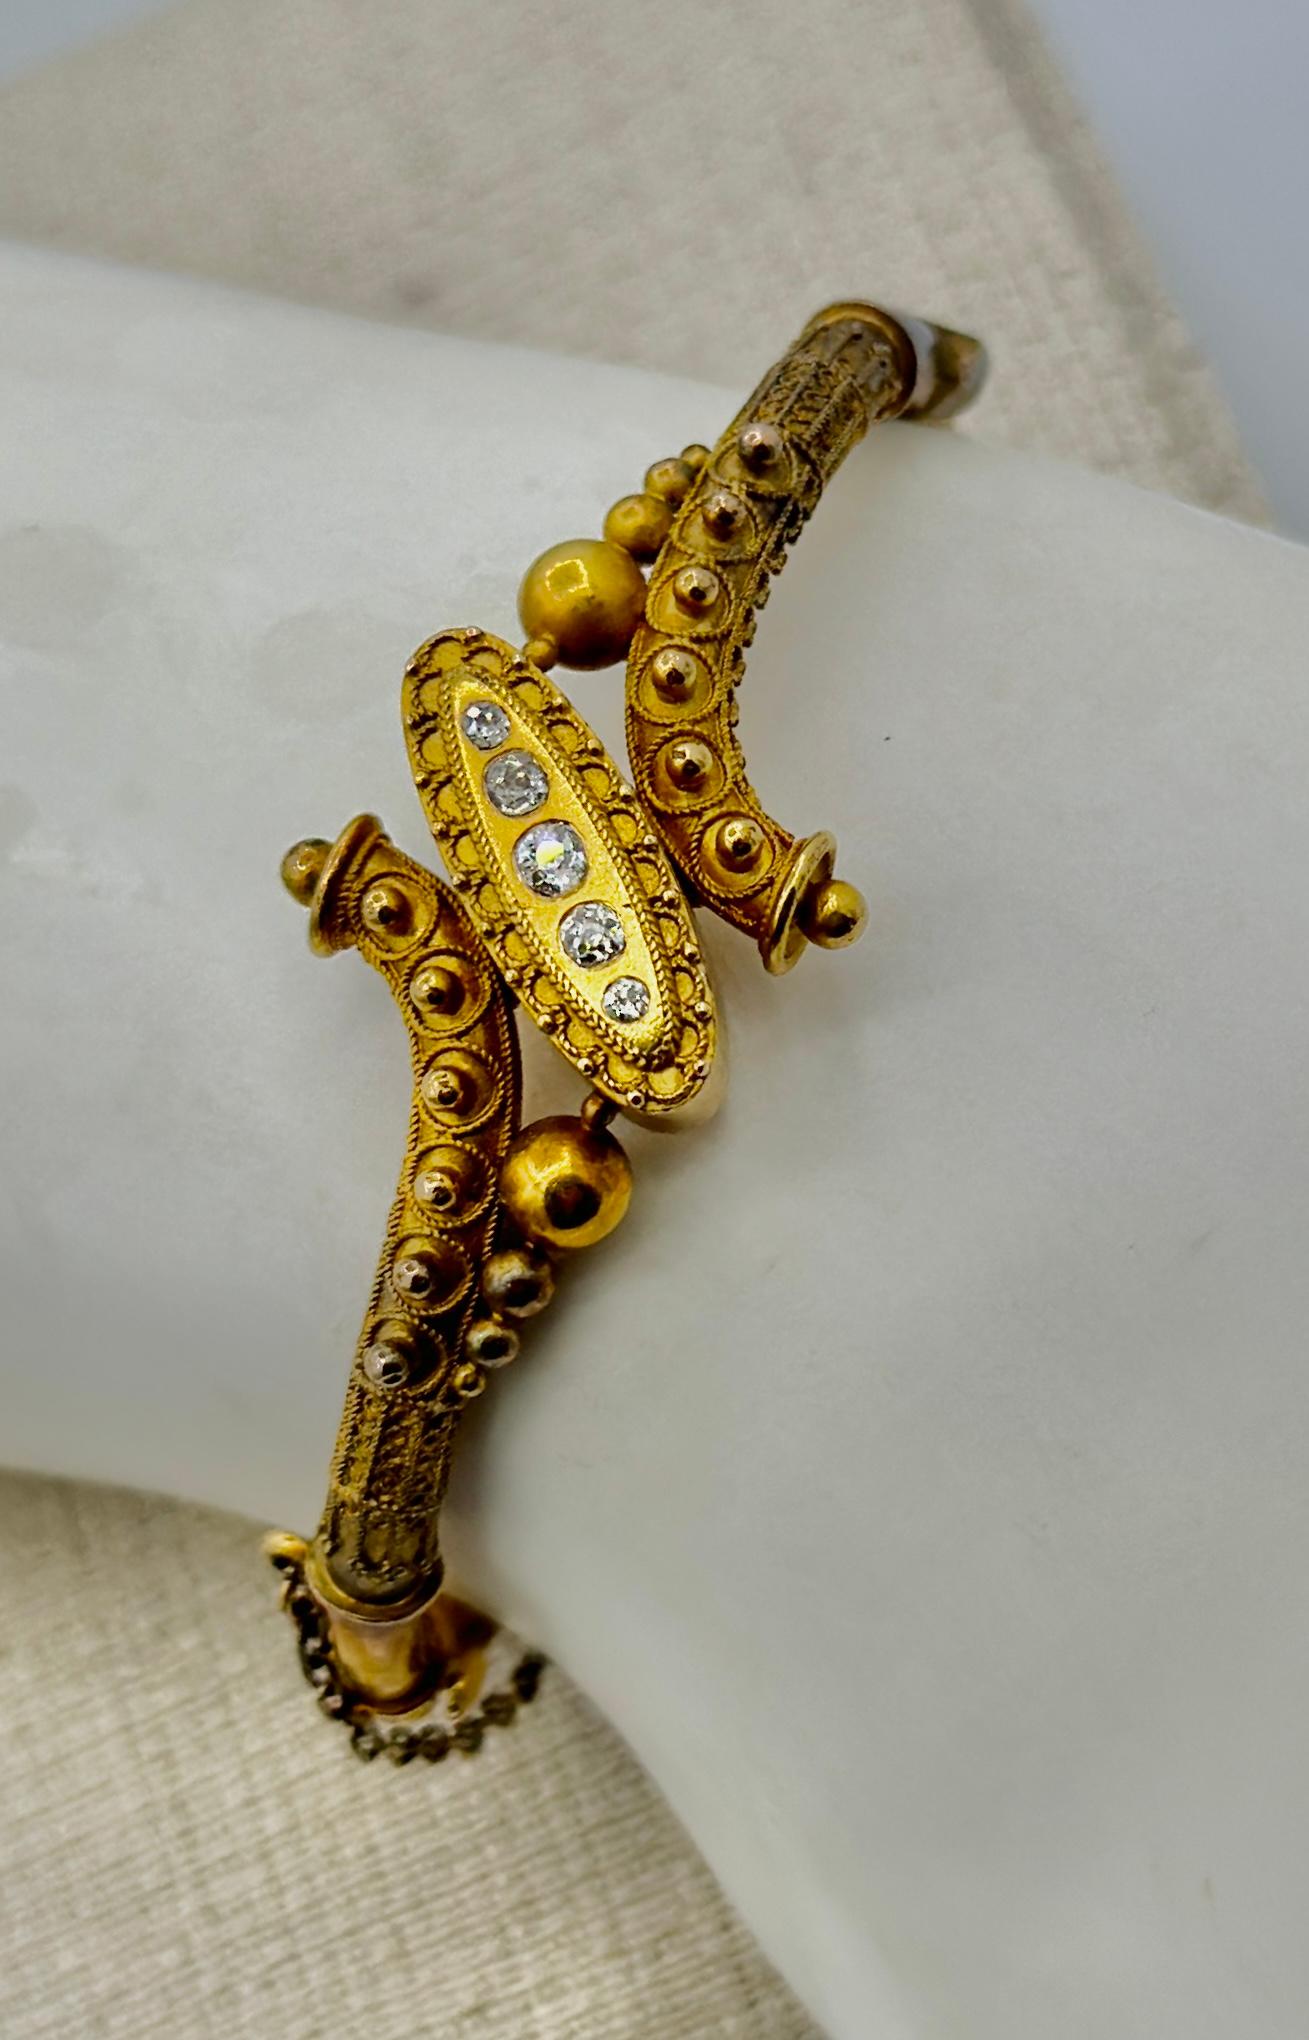 THIS IS A STUNNING ANTIQUE VICTORIAN ETRUSCAN REVIVAL 14-18 KARAT GOLD AND OLD MINE CUT DIAMOND BANGLE BRACELET.
The hinged bangle bracelet has museum quality Etruscan hand applied bead and rope work accents of extraordinary detail.  In the center